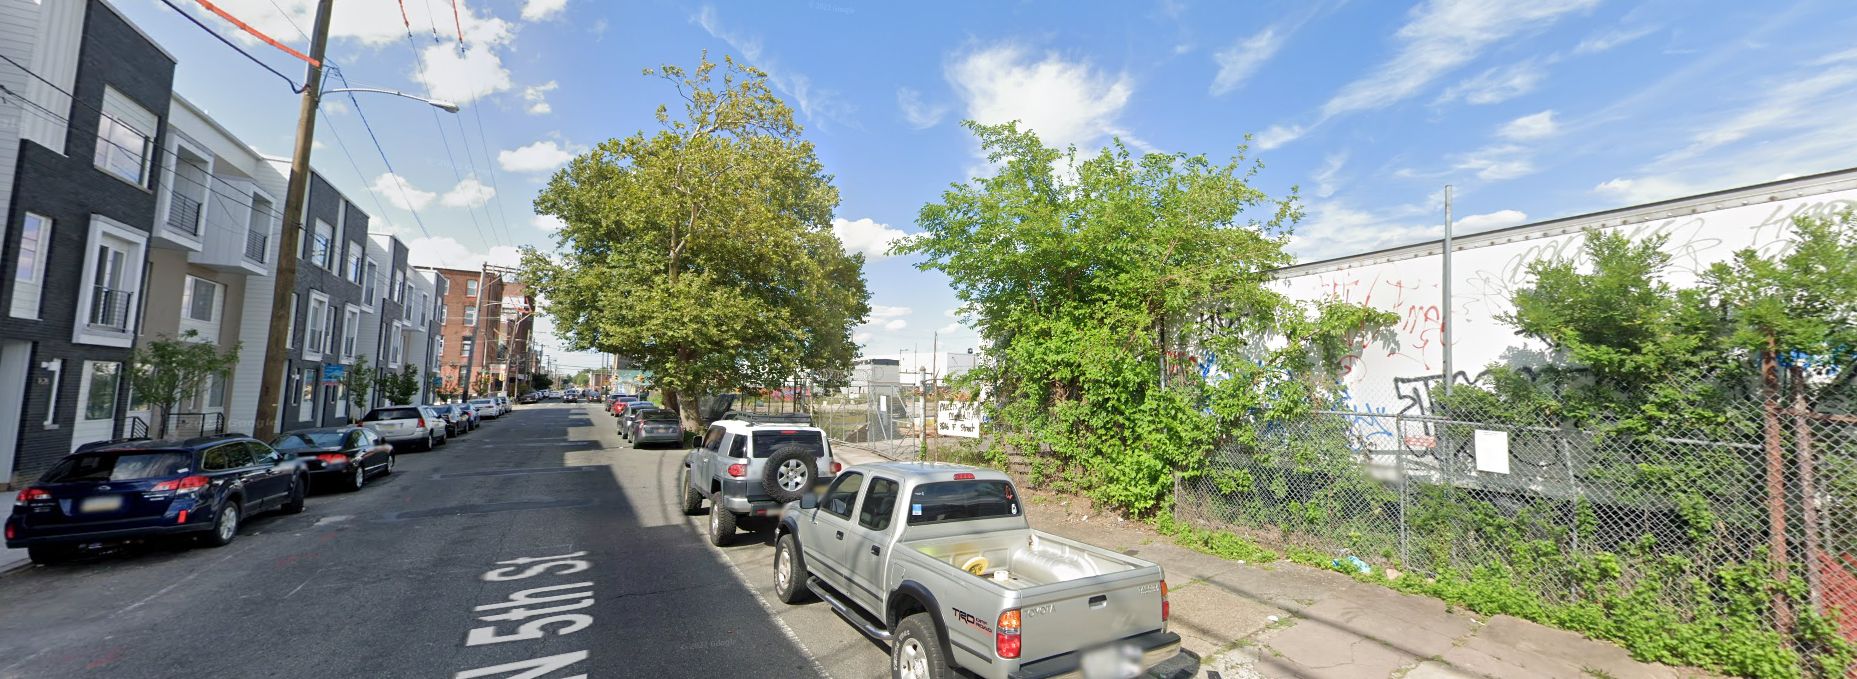 1625-35 North 5th Street. Site conditions prior to redevelopment. Looking northeast. August 2019. Credit: Google Maps